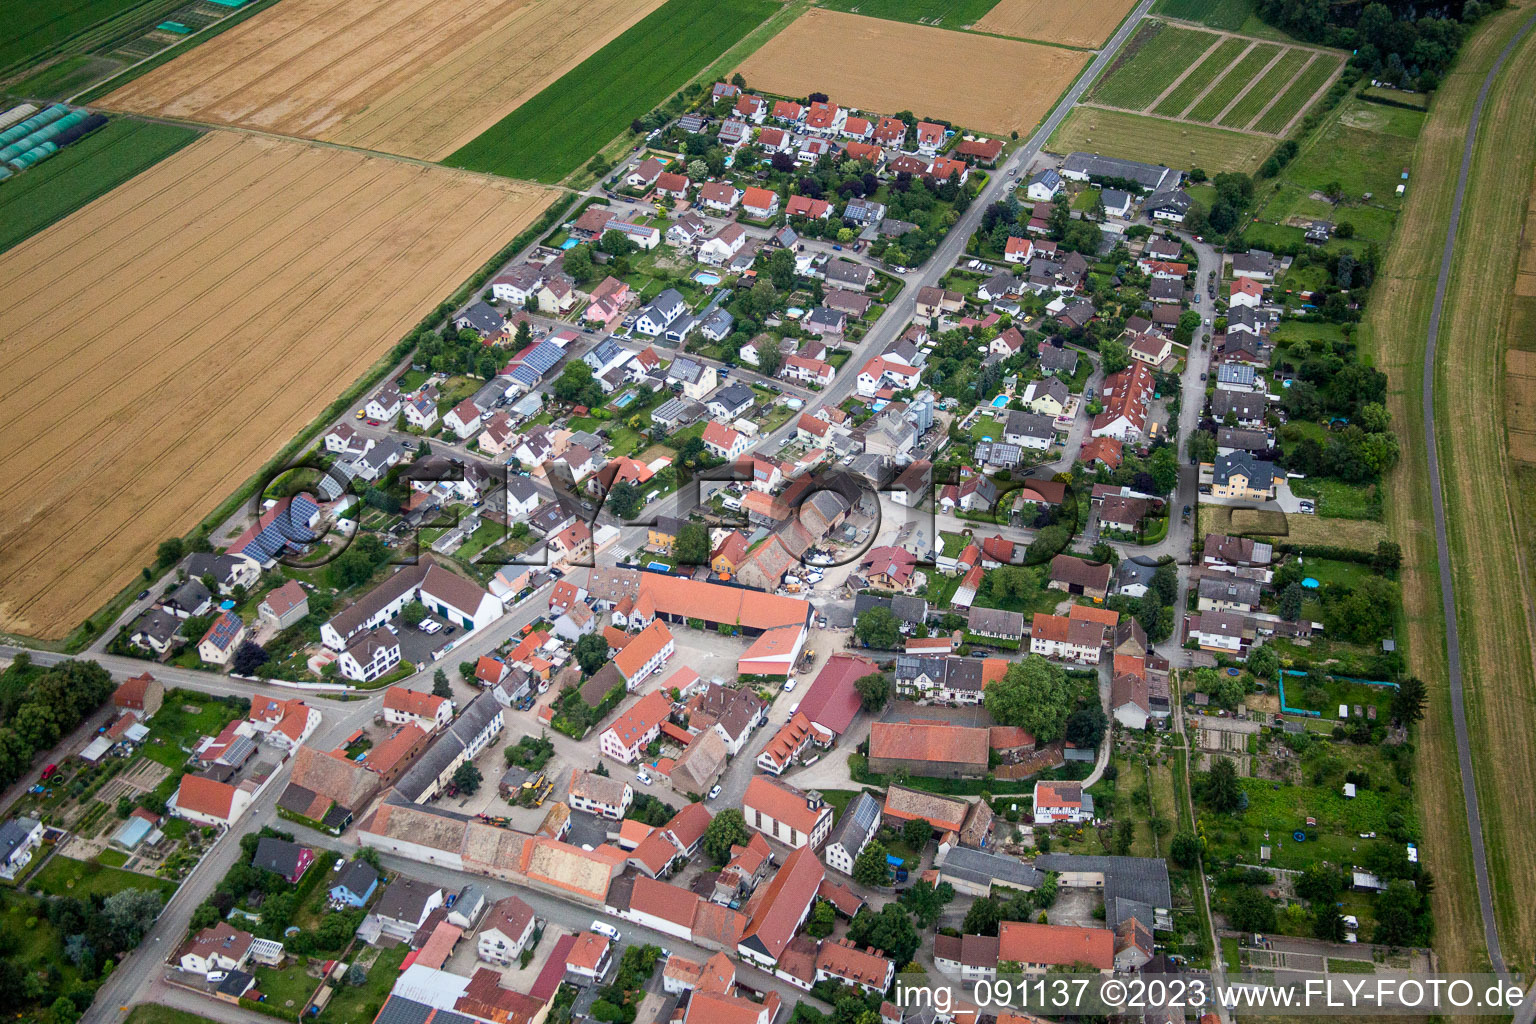 Oblique view of District Ibersheim in Worms in the state Rhineland-Palatinate, Germany